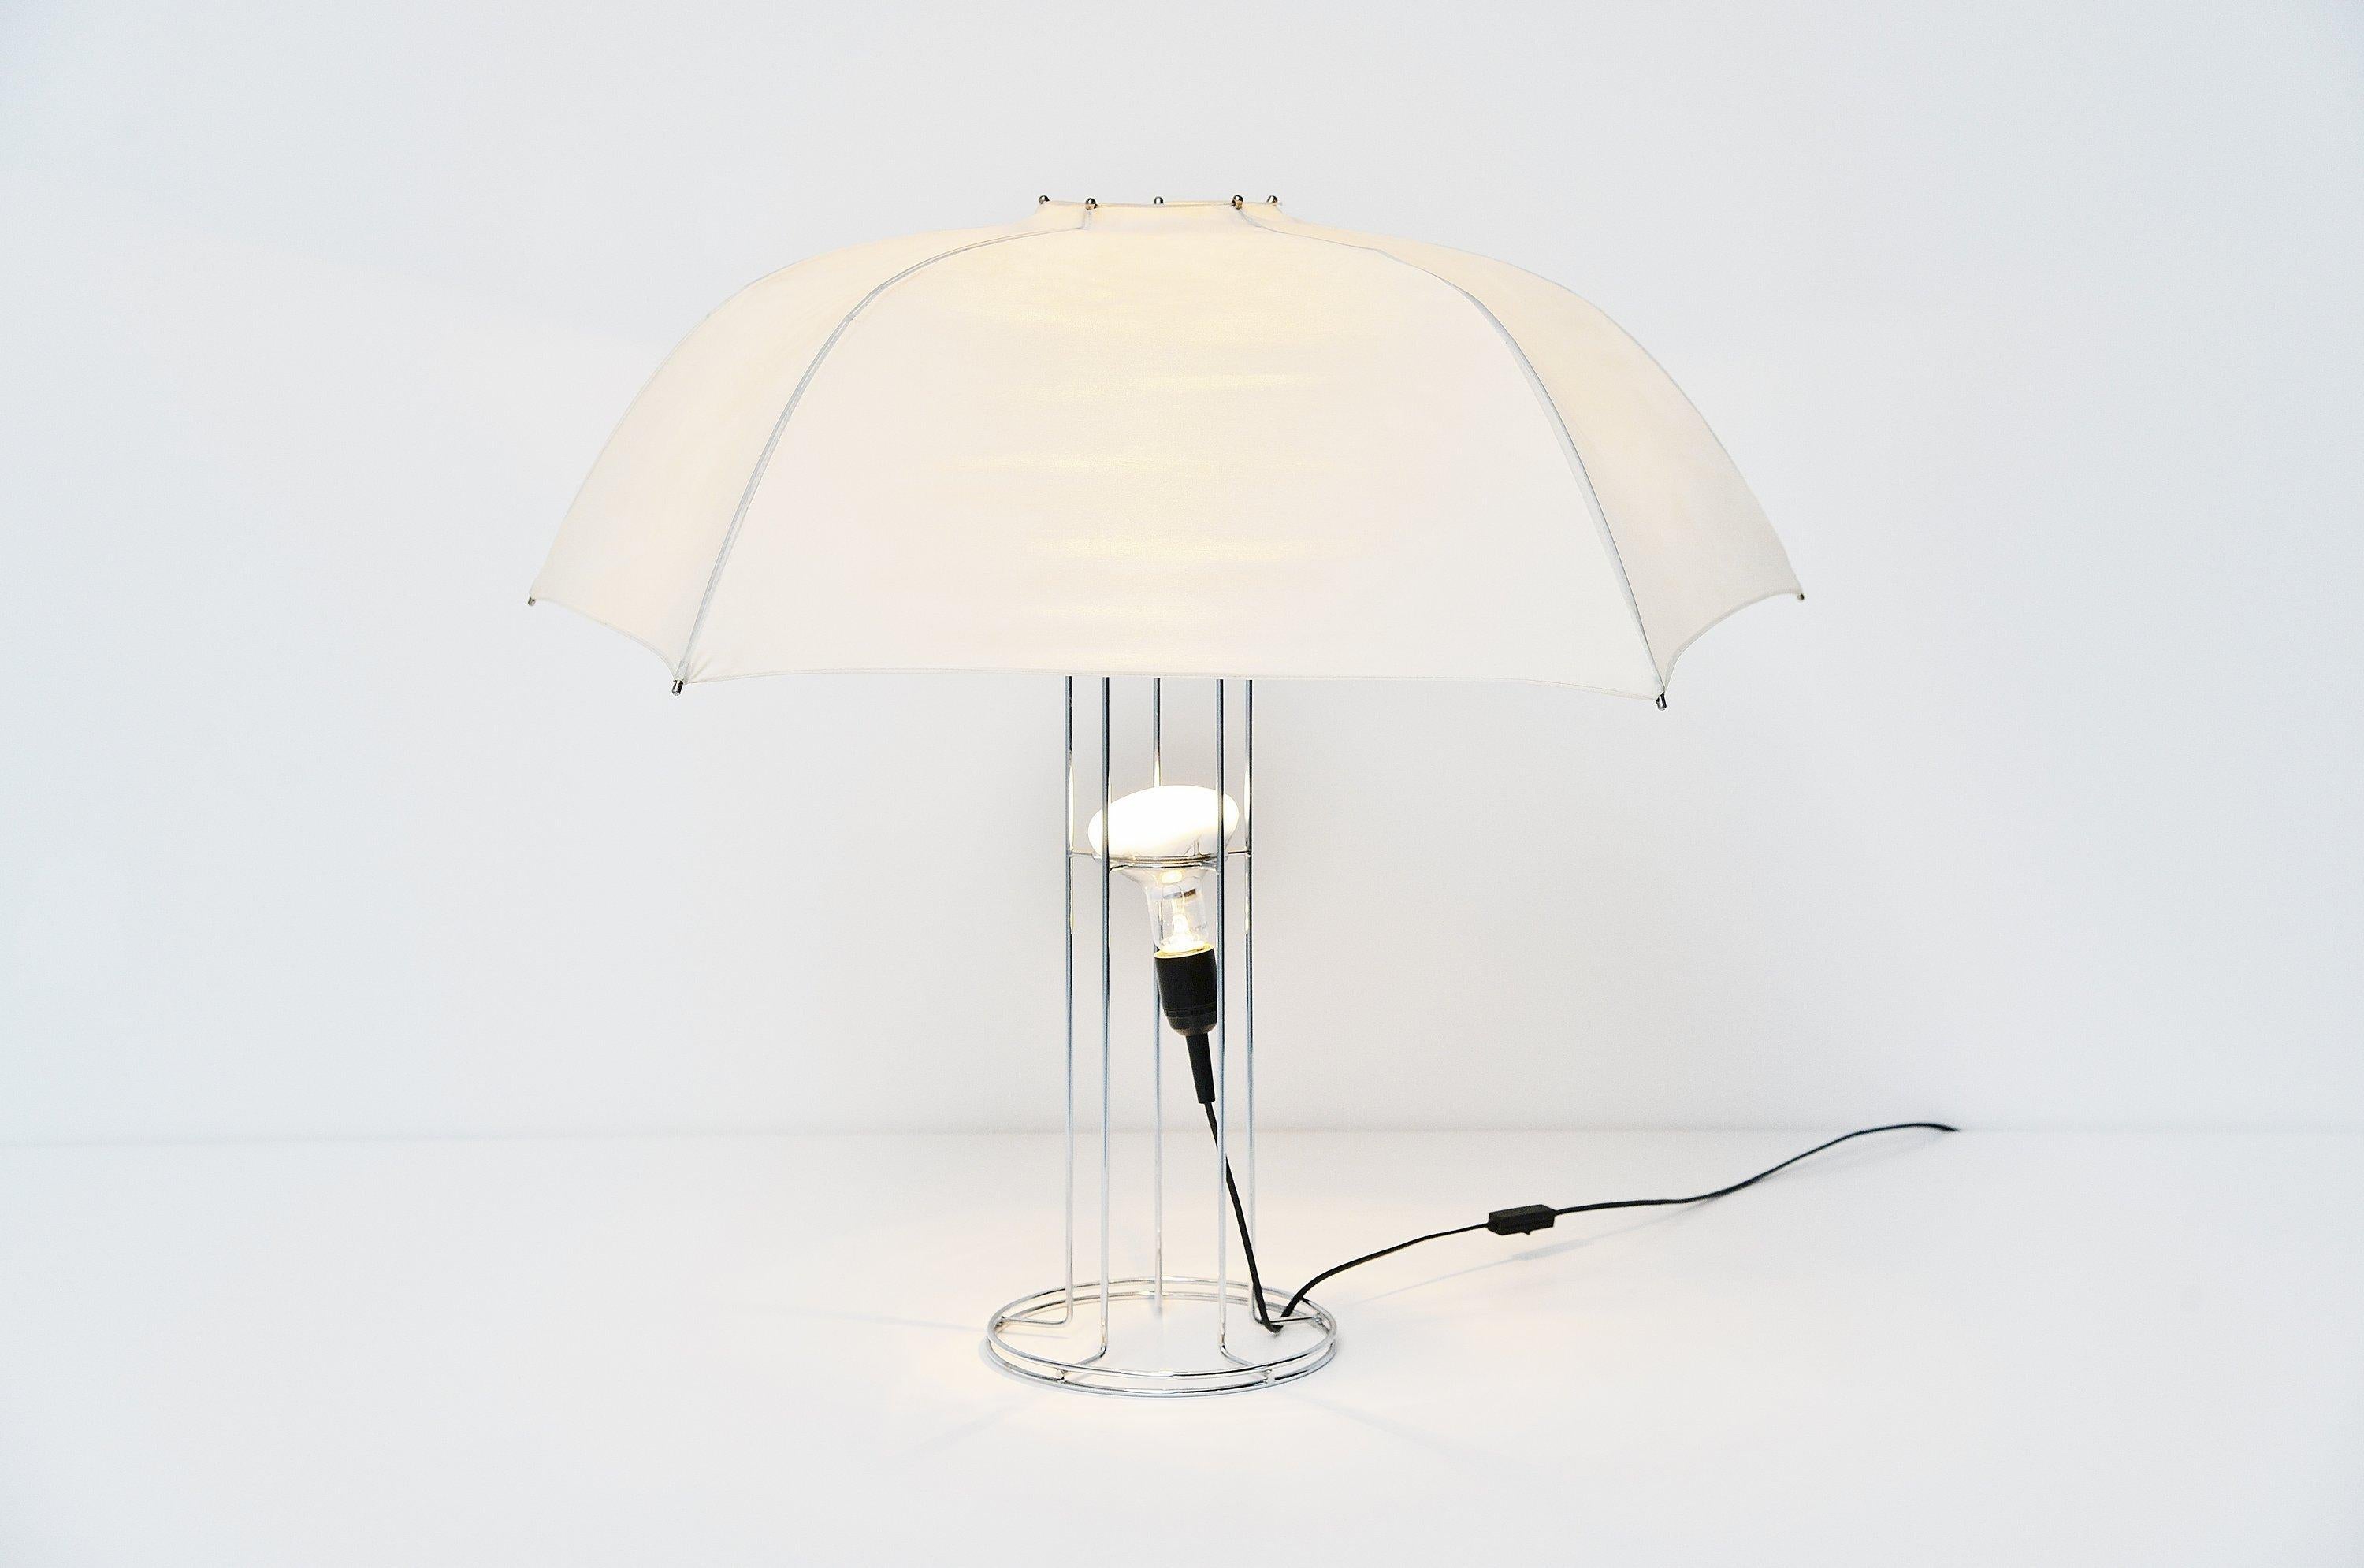 Cool umbrella table lamp designed by Gijs Bakker and manufactured by Artimeta, Holland, 1973. Bakker was inspired by the type of lamp that photographers use. The five ribs continue as the five rods of the stand. The reflecting lamp is suspended in